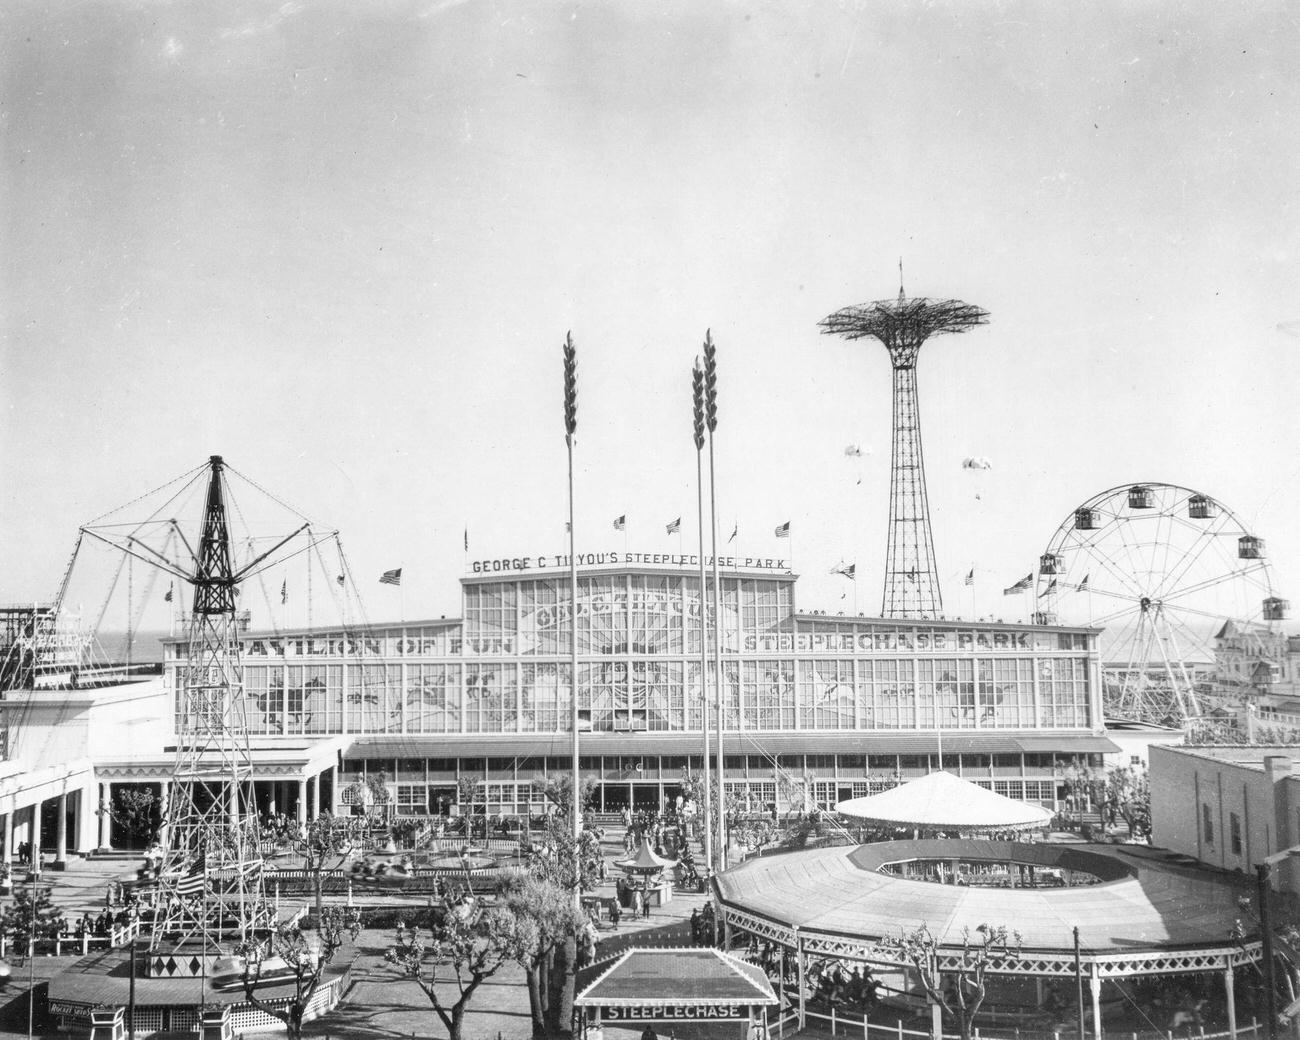 General View Of Rides At Steeplechase Park In Coney Island, 1950.